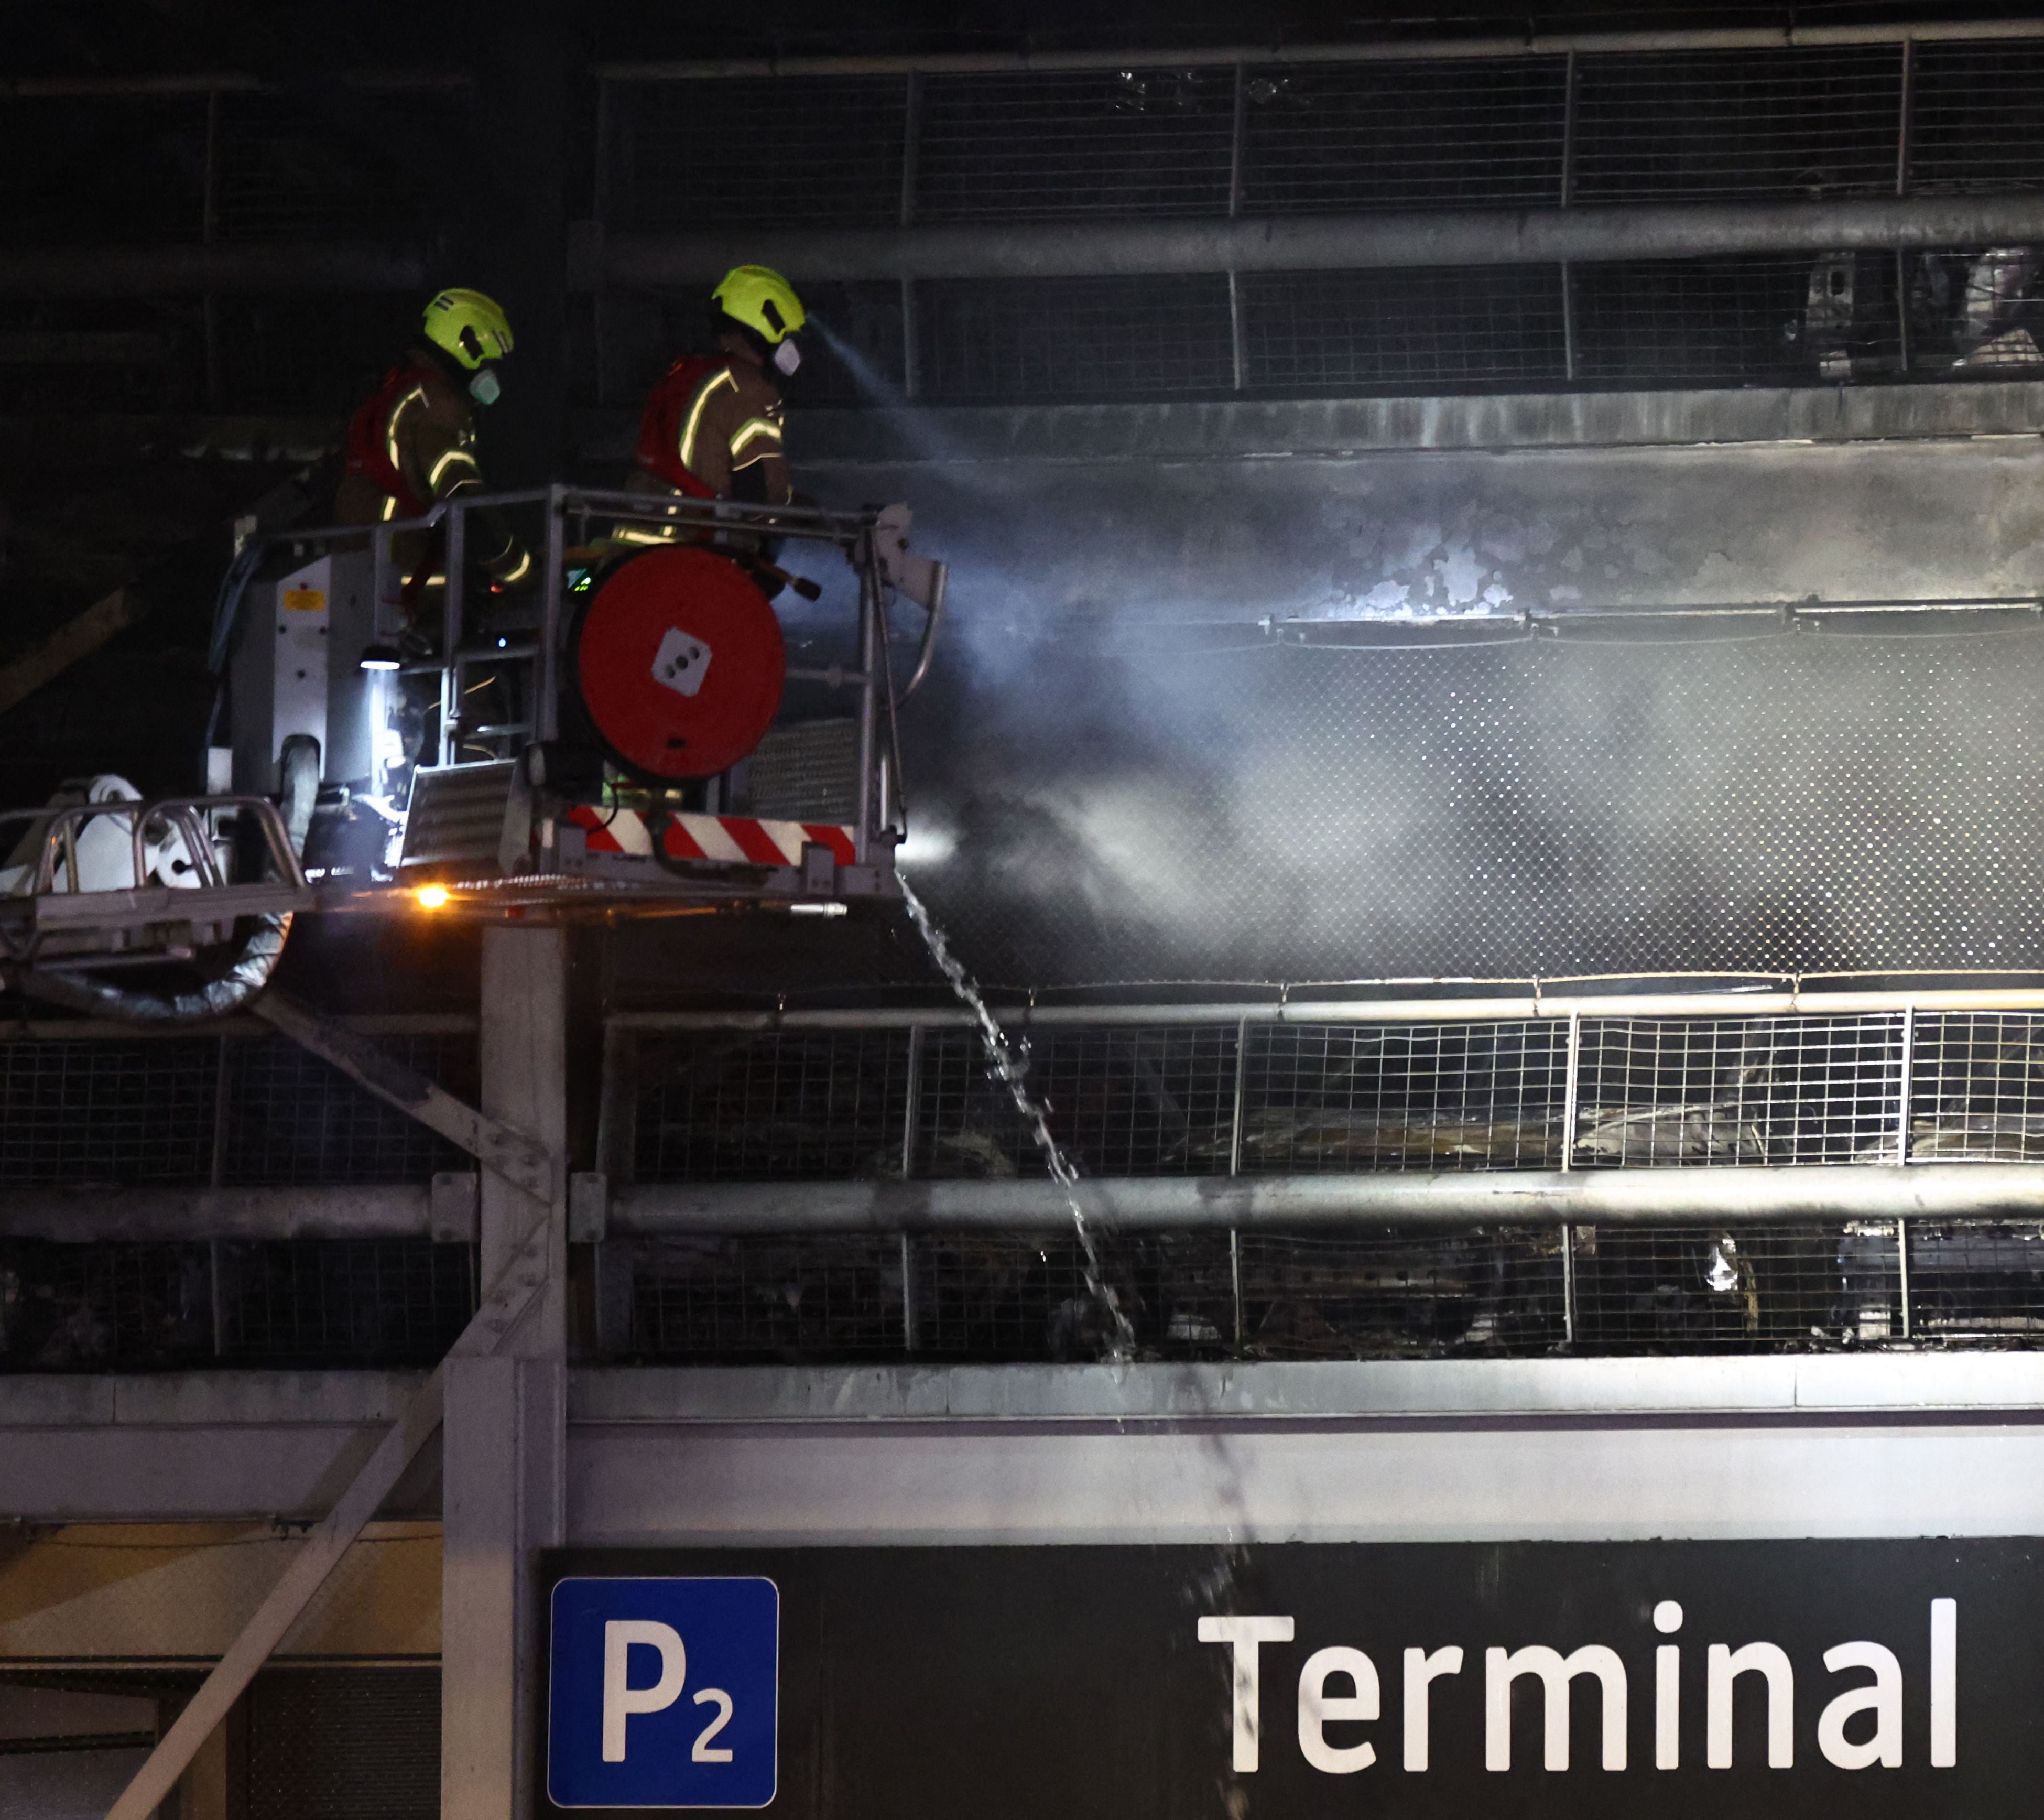 Firemen battle a fire at London's Luton Airport which caused a partial collapse of a parking structure